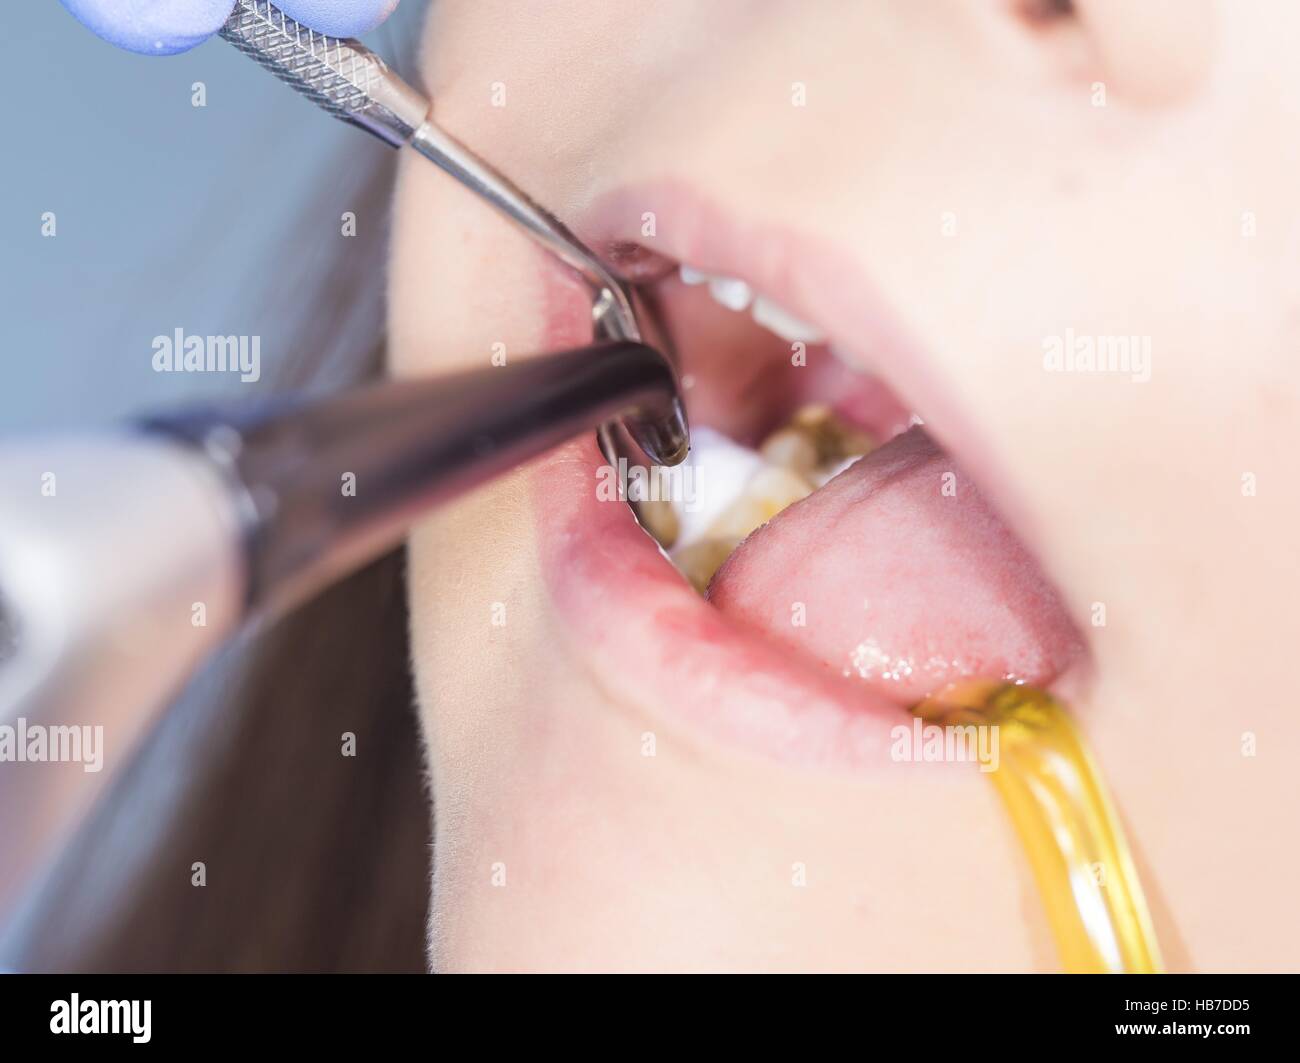 Dentist filling woman's teeth with composite material. Stock Photo